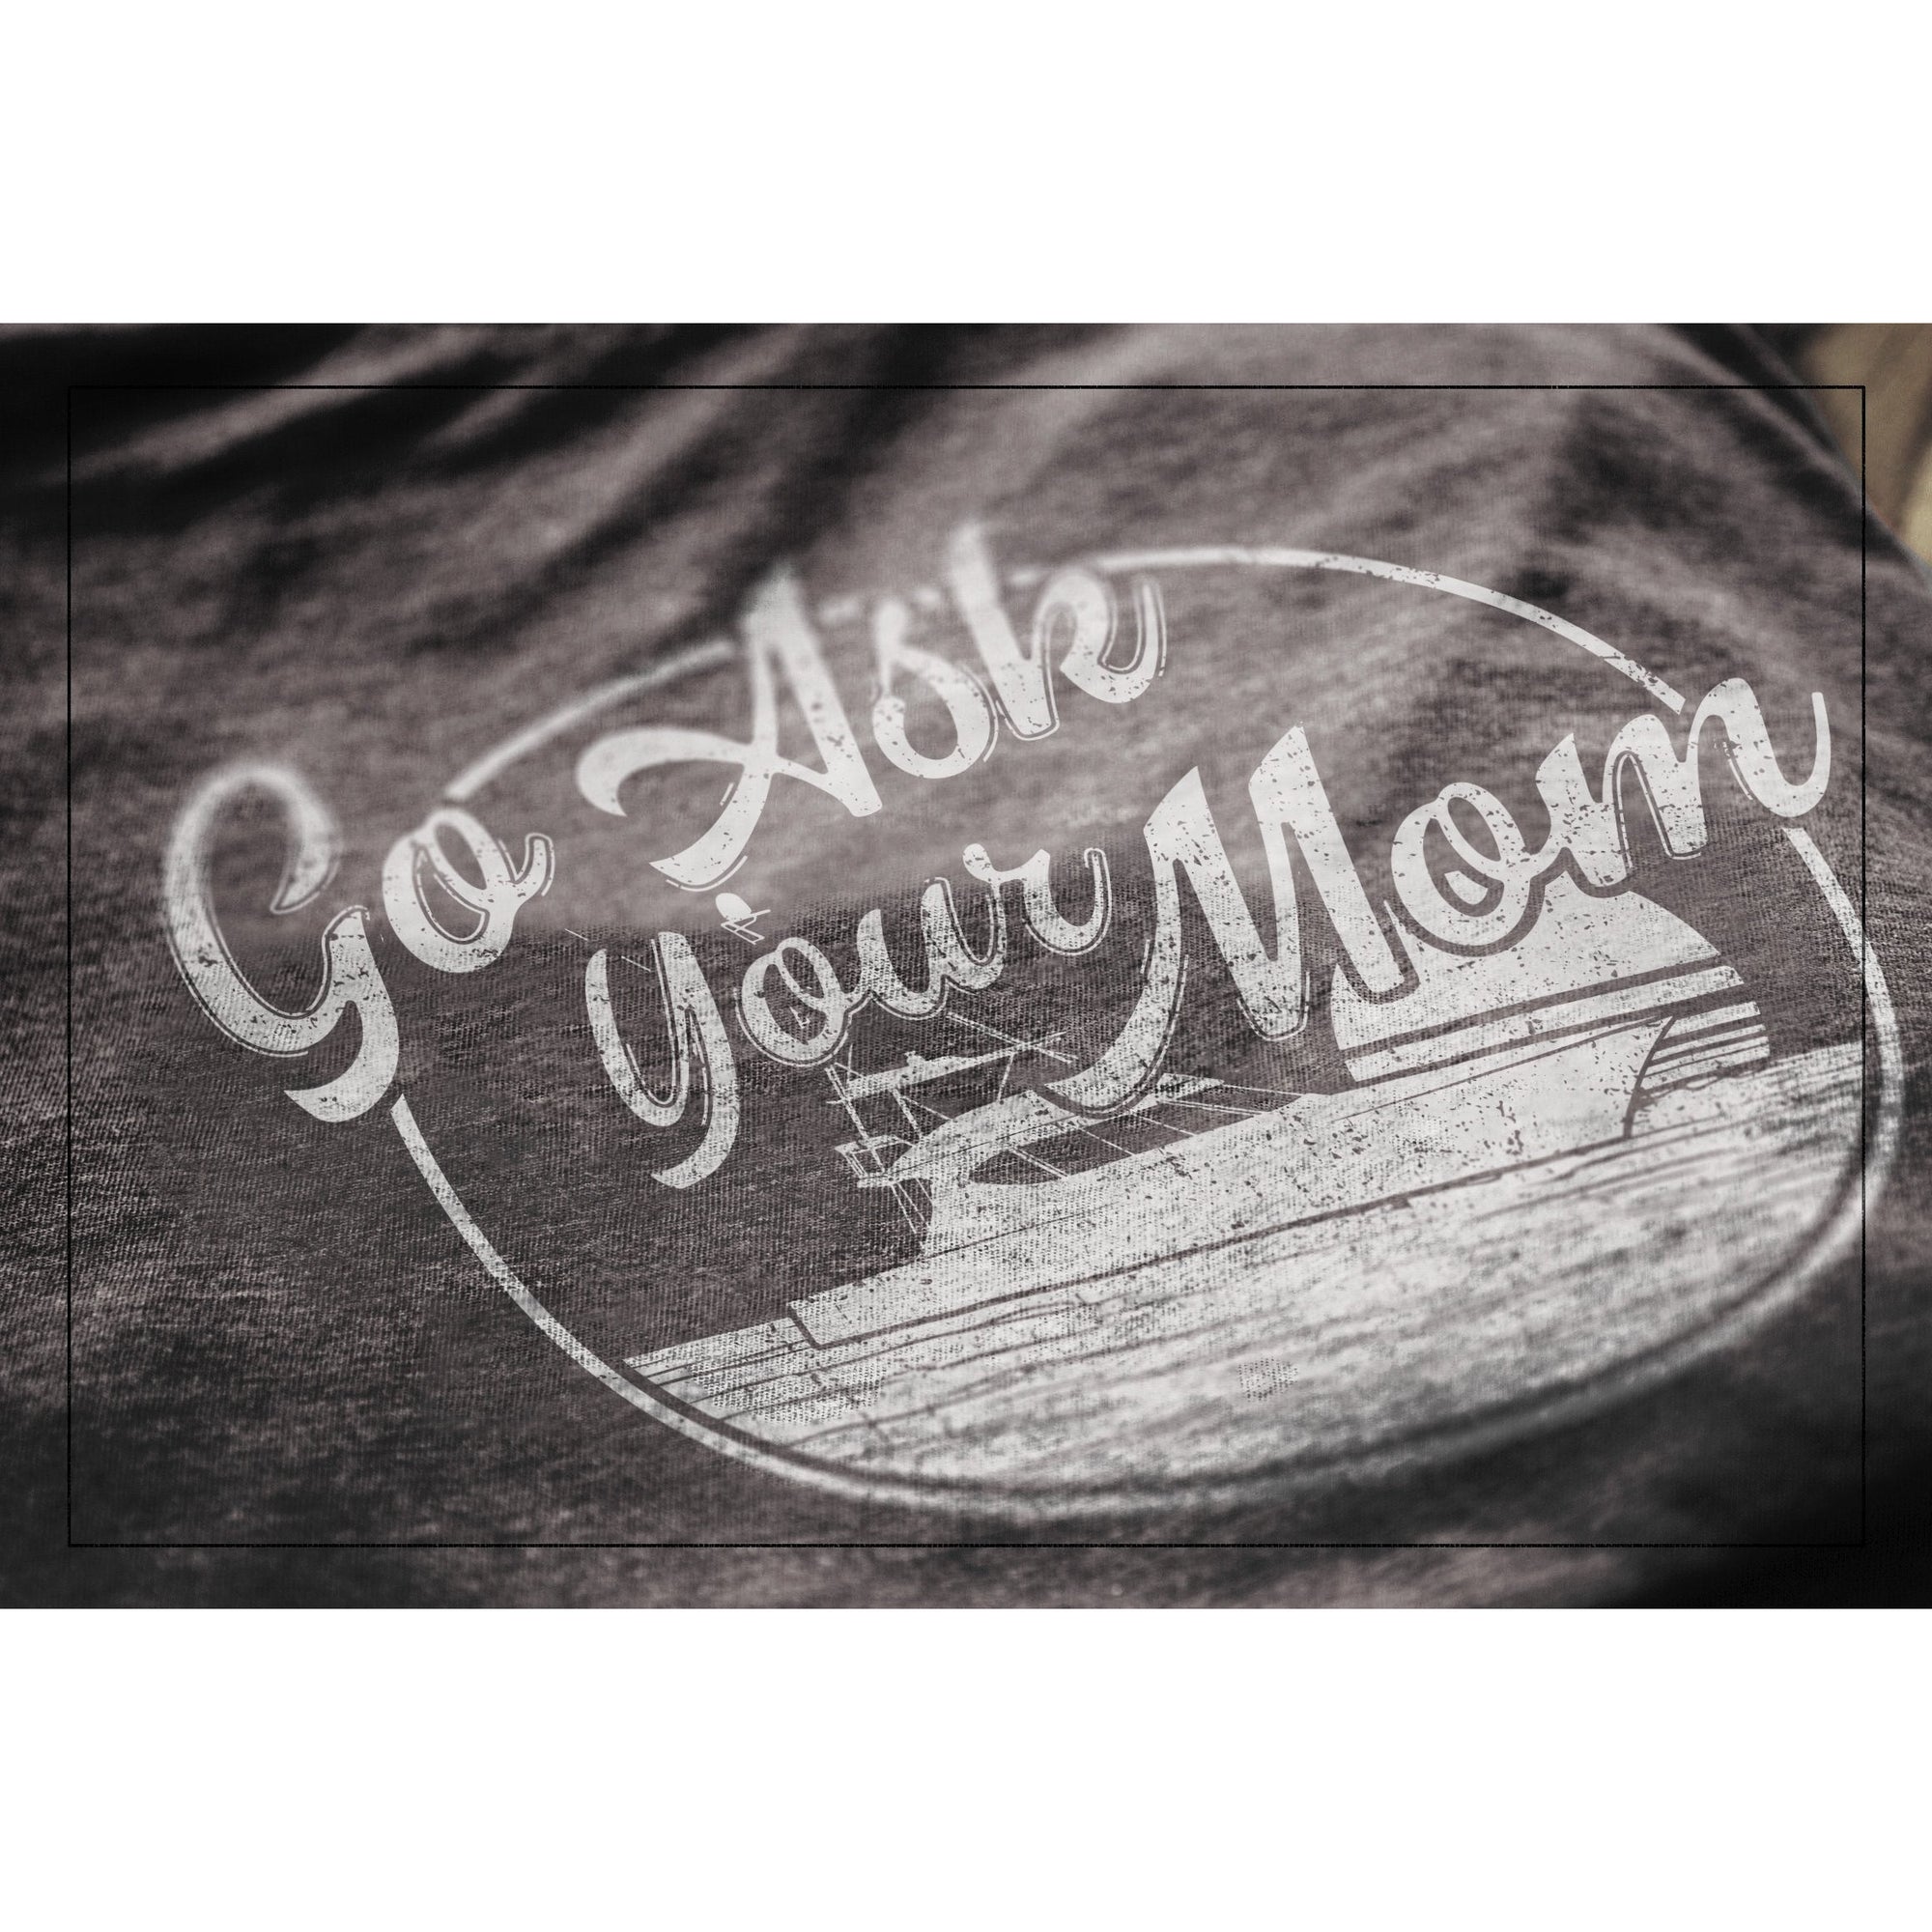 Go Ask Your Mom Charcoal Printed Graphic Men's Crew T-Shirt Tee Closeup Details